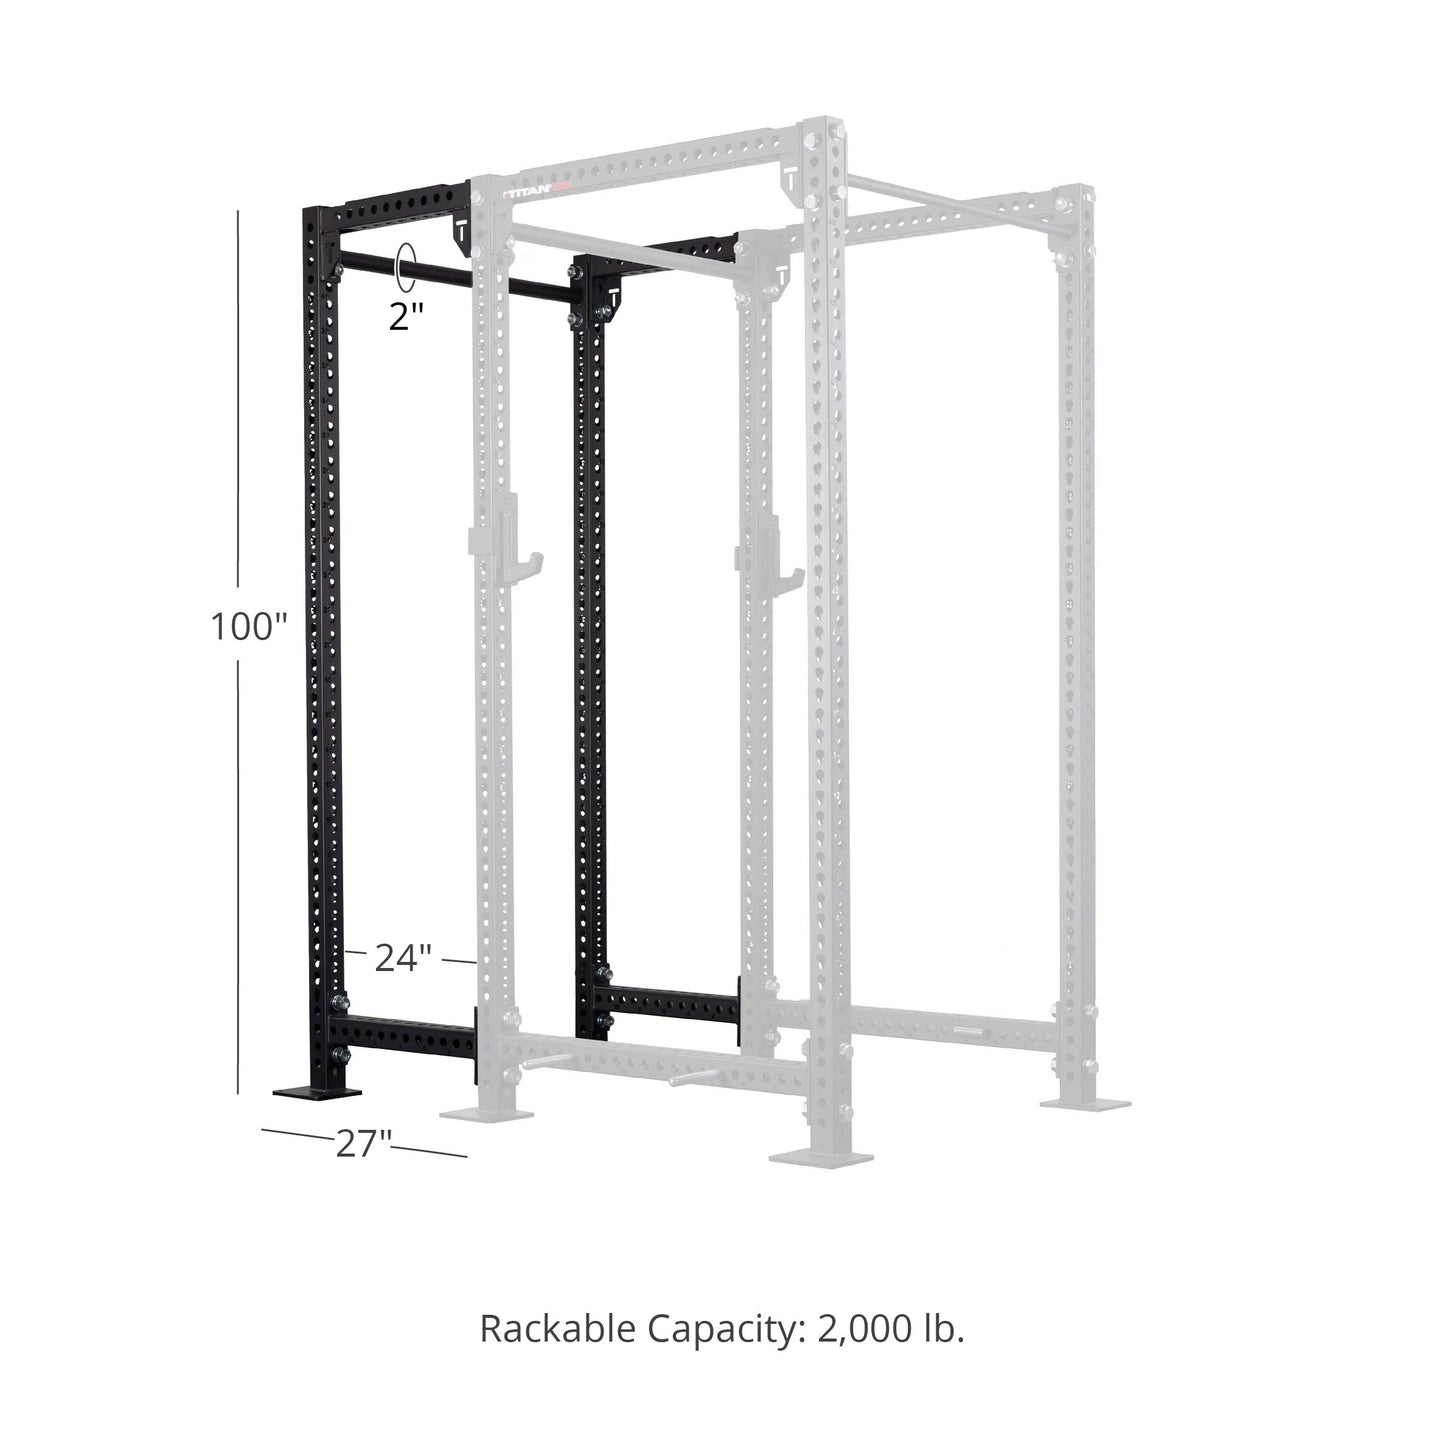 TITAN Series 24" Extension Kit - Extension Color: Black - Extension Height: 100" - Crossmember: 2" Fat Pull-Up Bar | Black / 100" / 2" Fat Pull-Up Bar - view 33